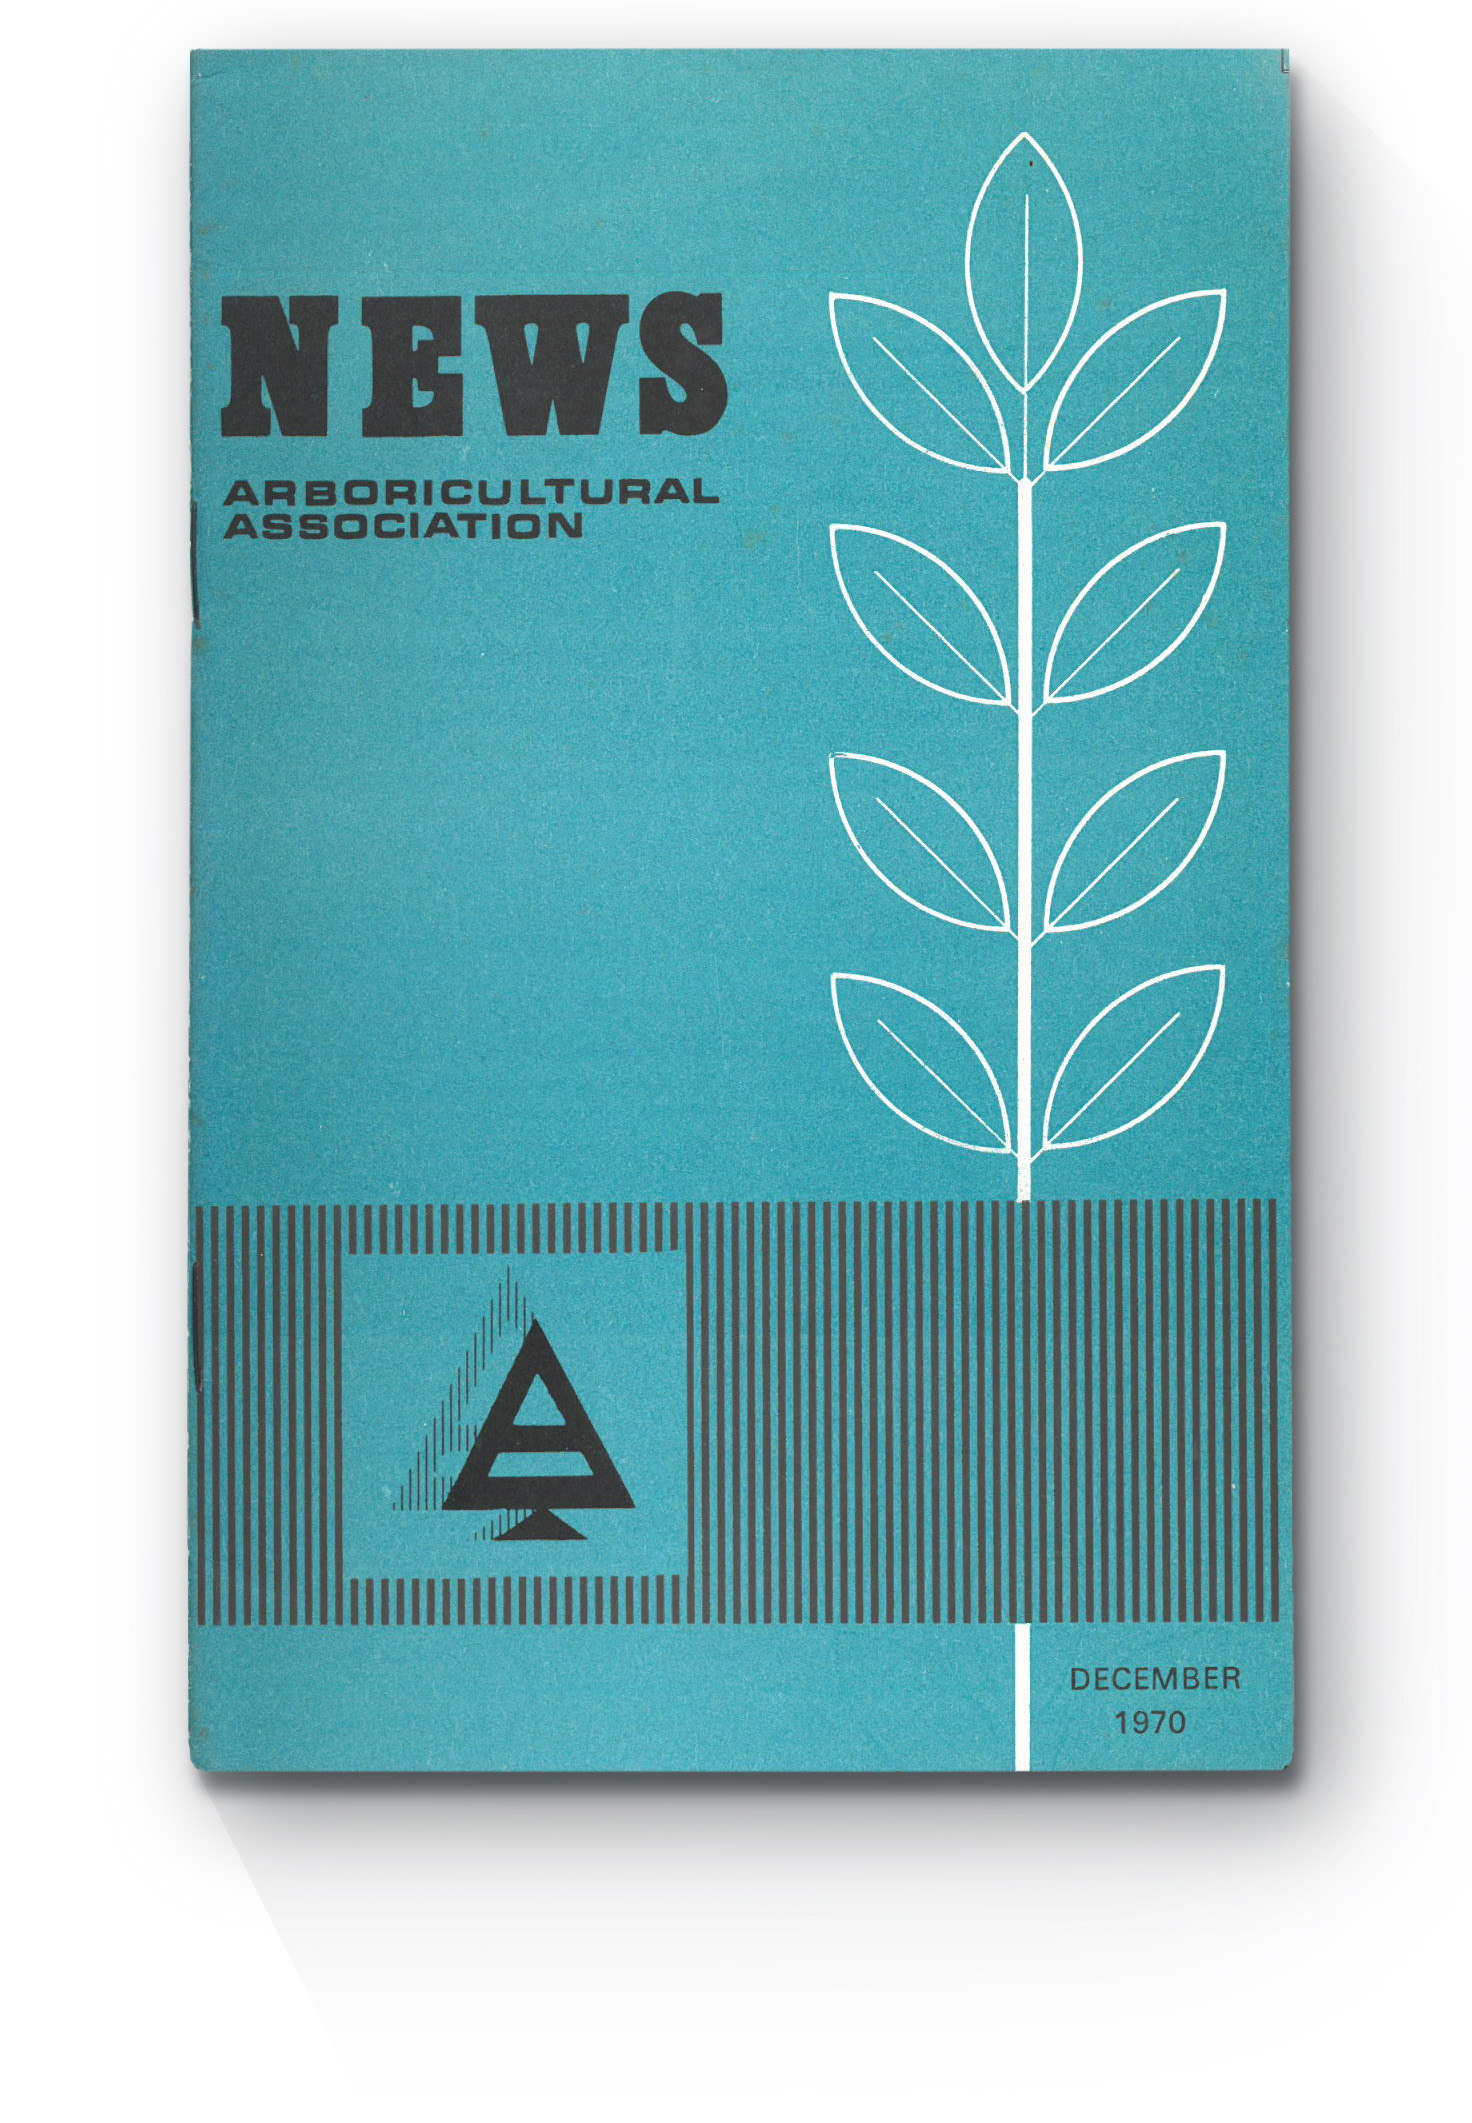 The December 1970 edition of the Arboricultural Association News